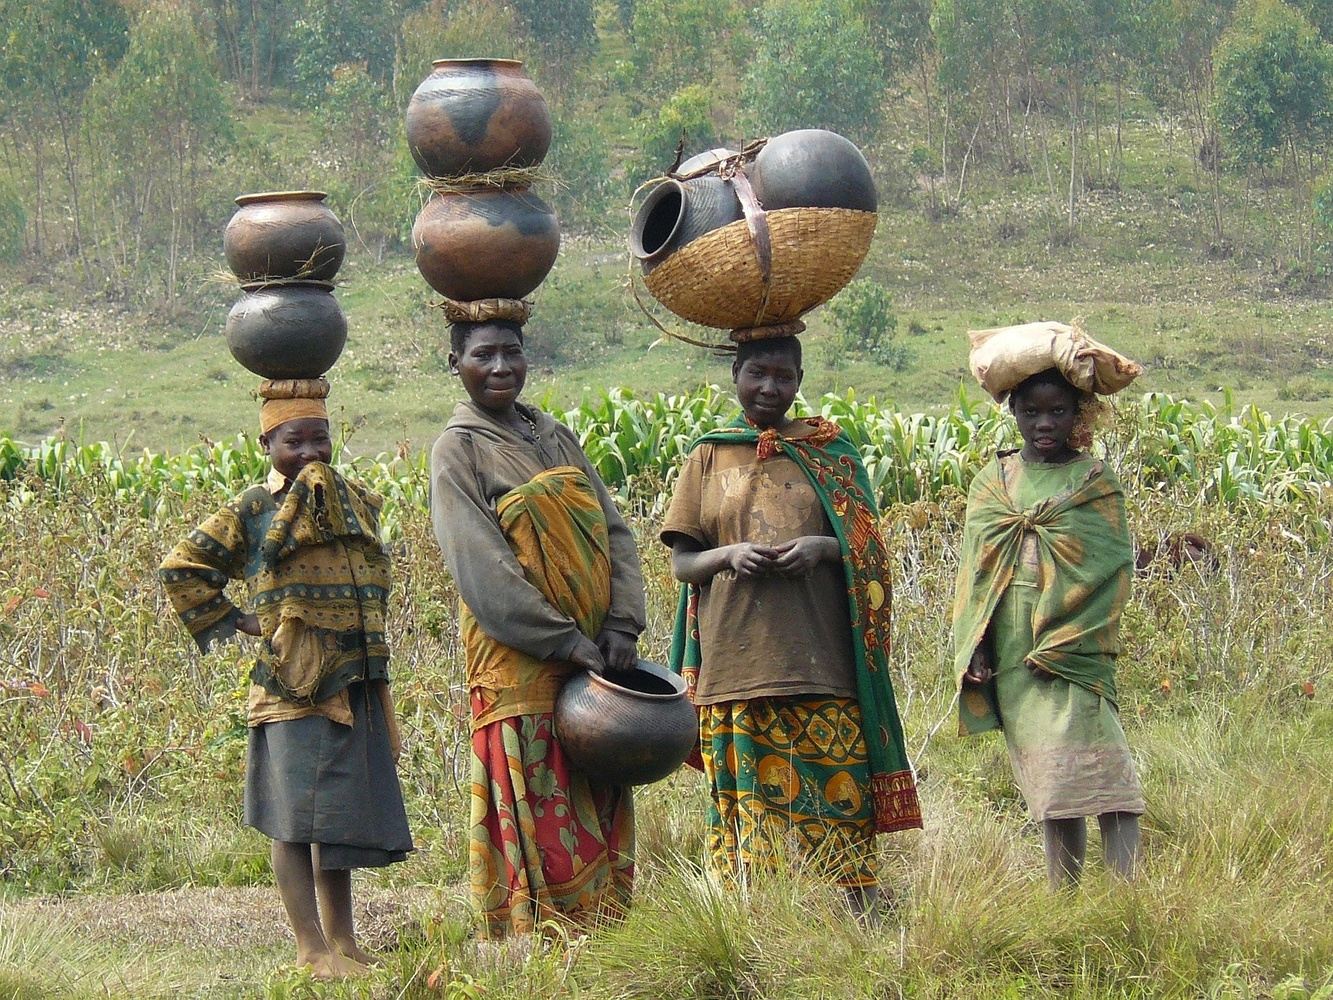 Meeting the Batwa Tribal Group & the Golden Monkey Experience